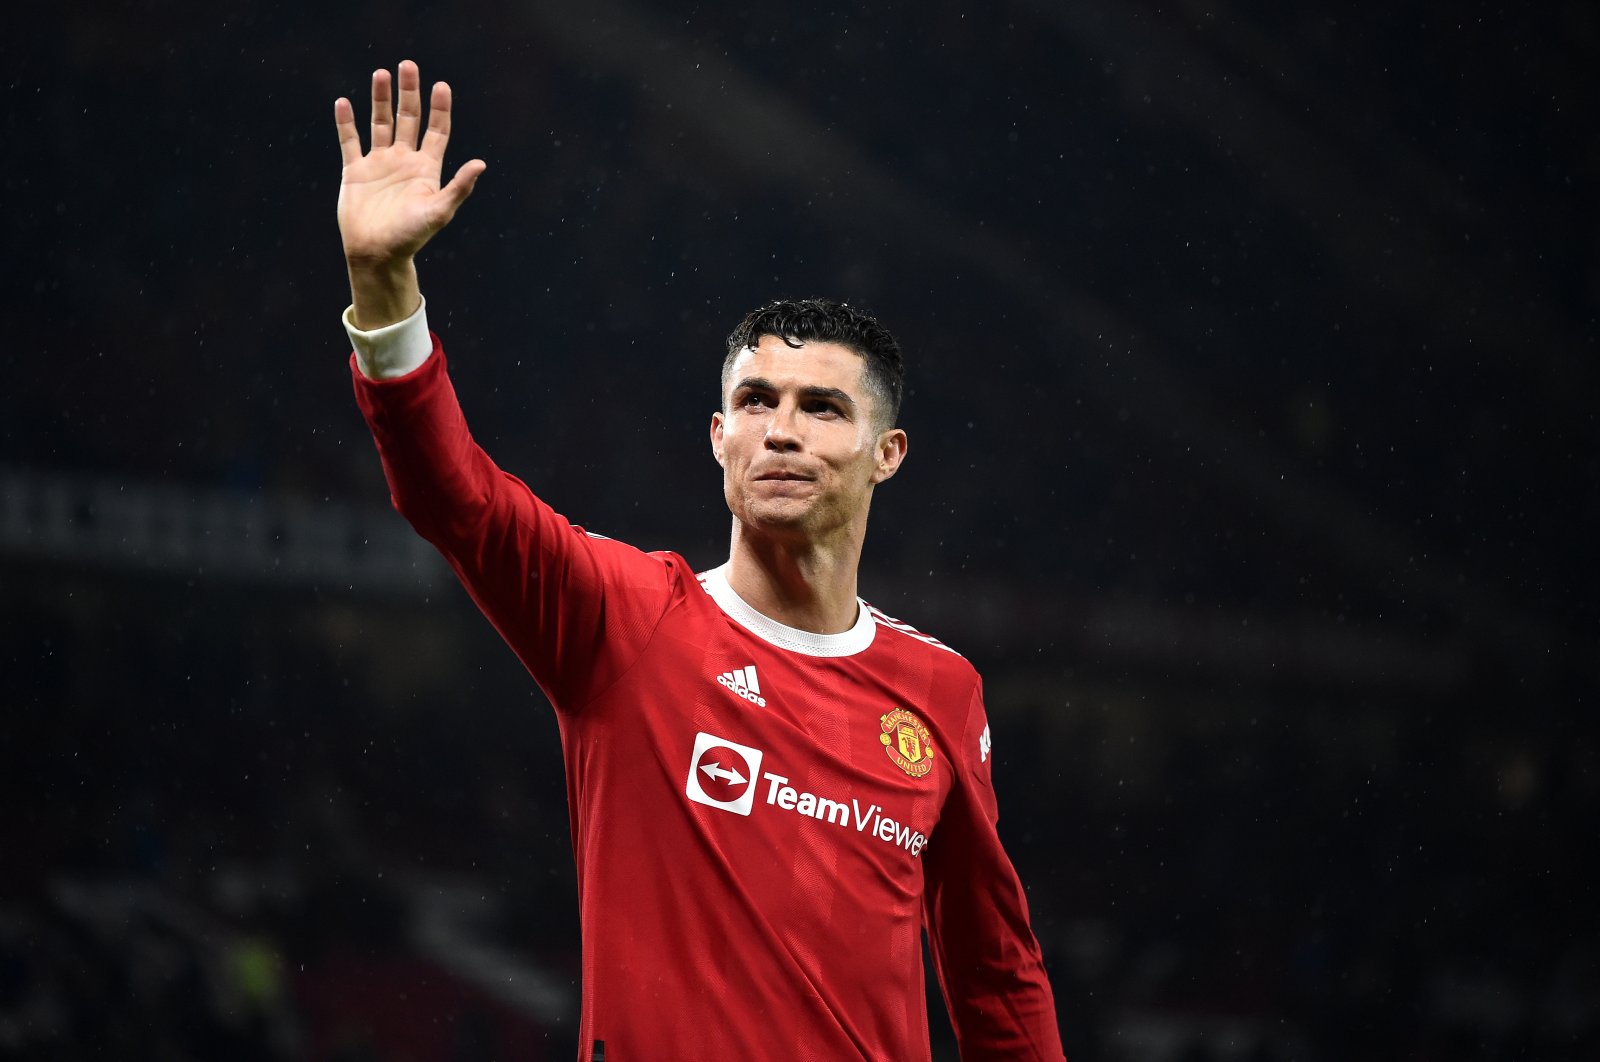 Man Utd&#039;s Cristiano Ronaldo waves at fans after a Premier League match against Brentford, Manchester, England, May 2, 2022. (EPA Photo)